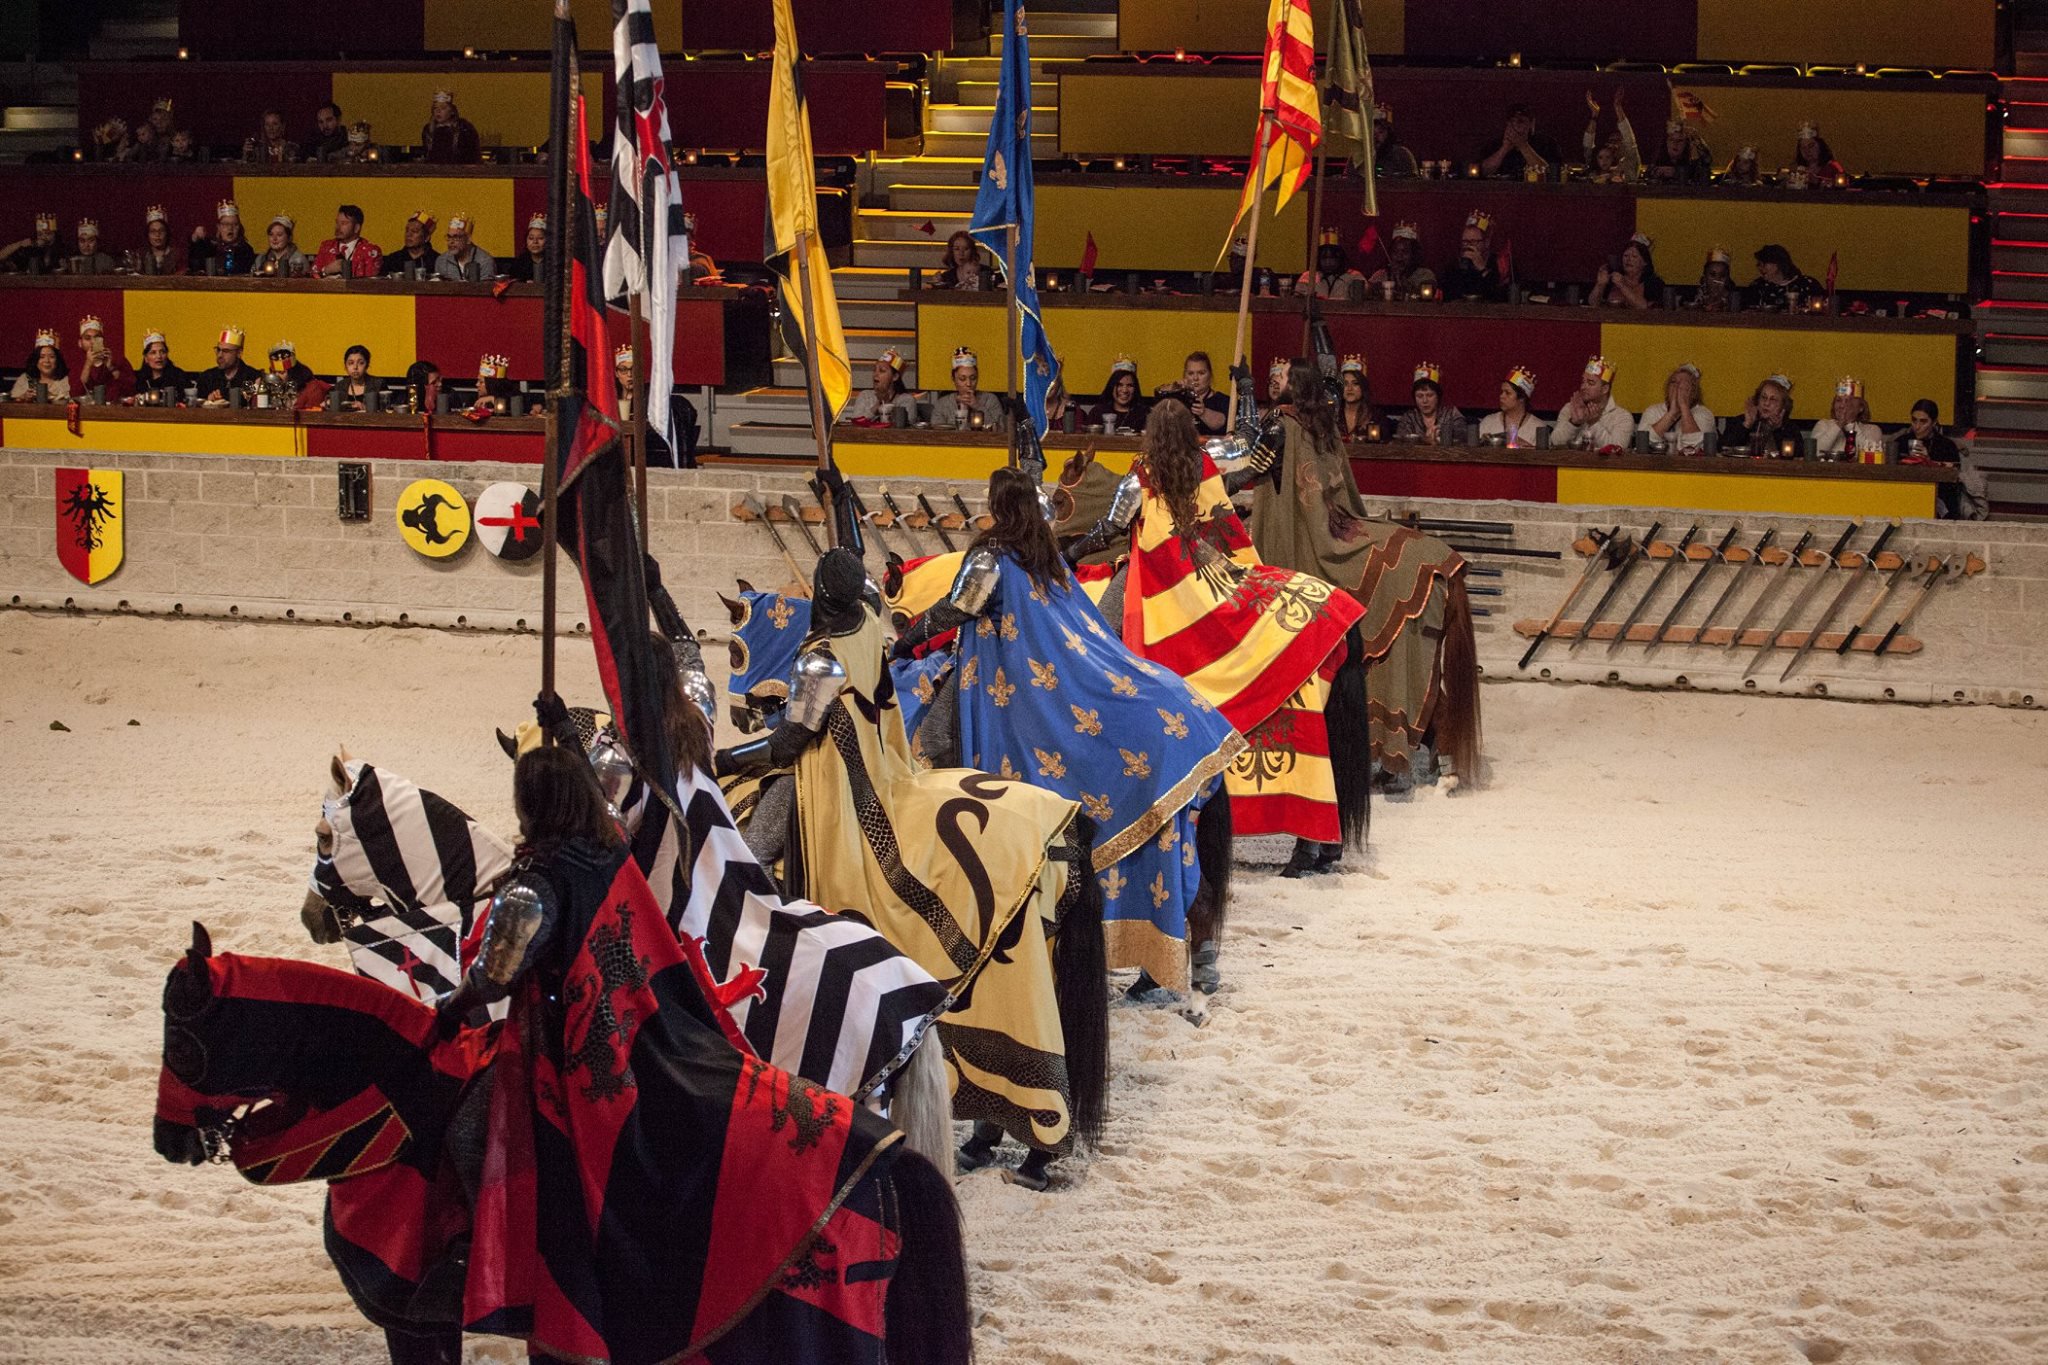 Medieval Times Dinner & Tournament opening this summer in Scottsdale